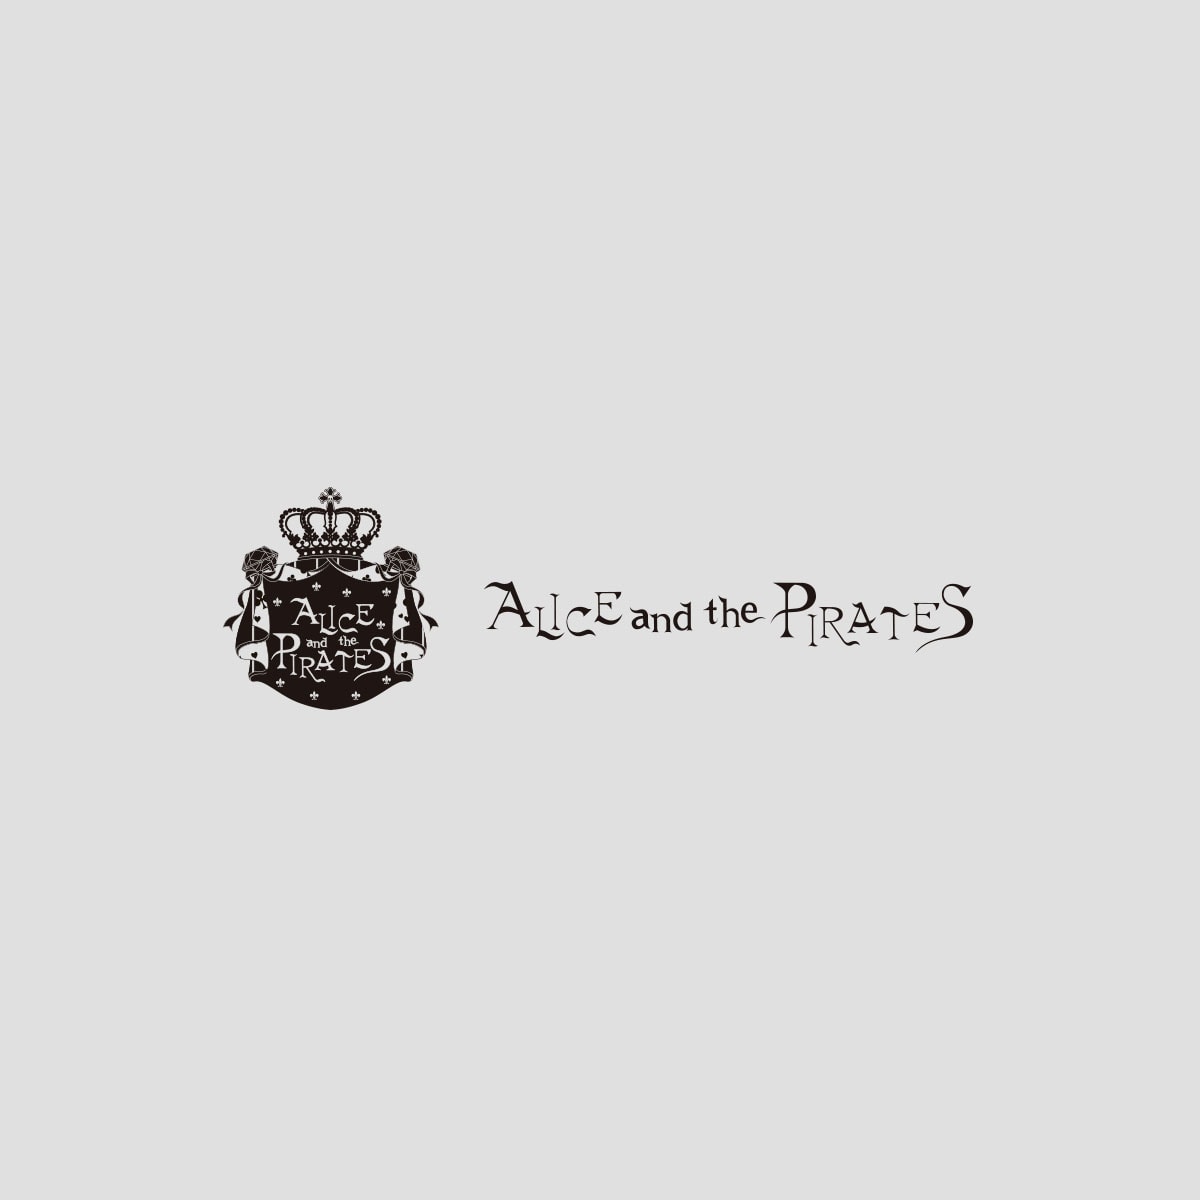 Alice and the Pirates logo.